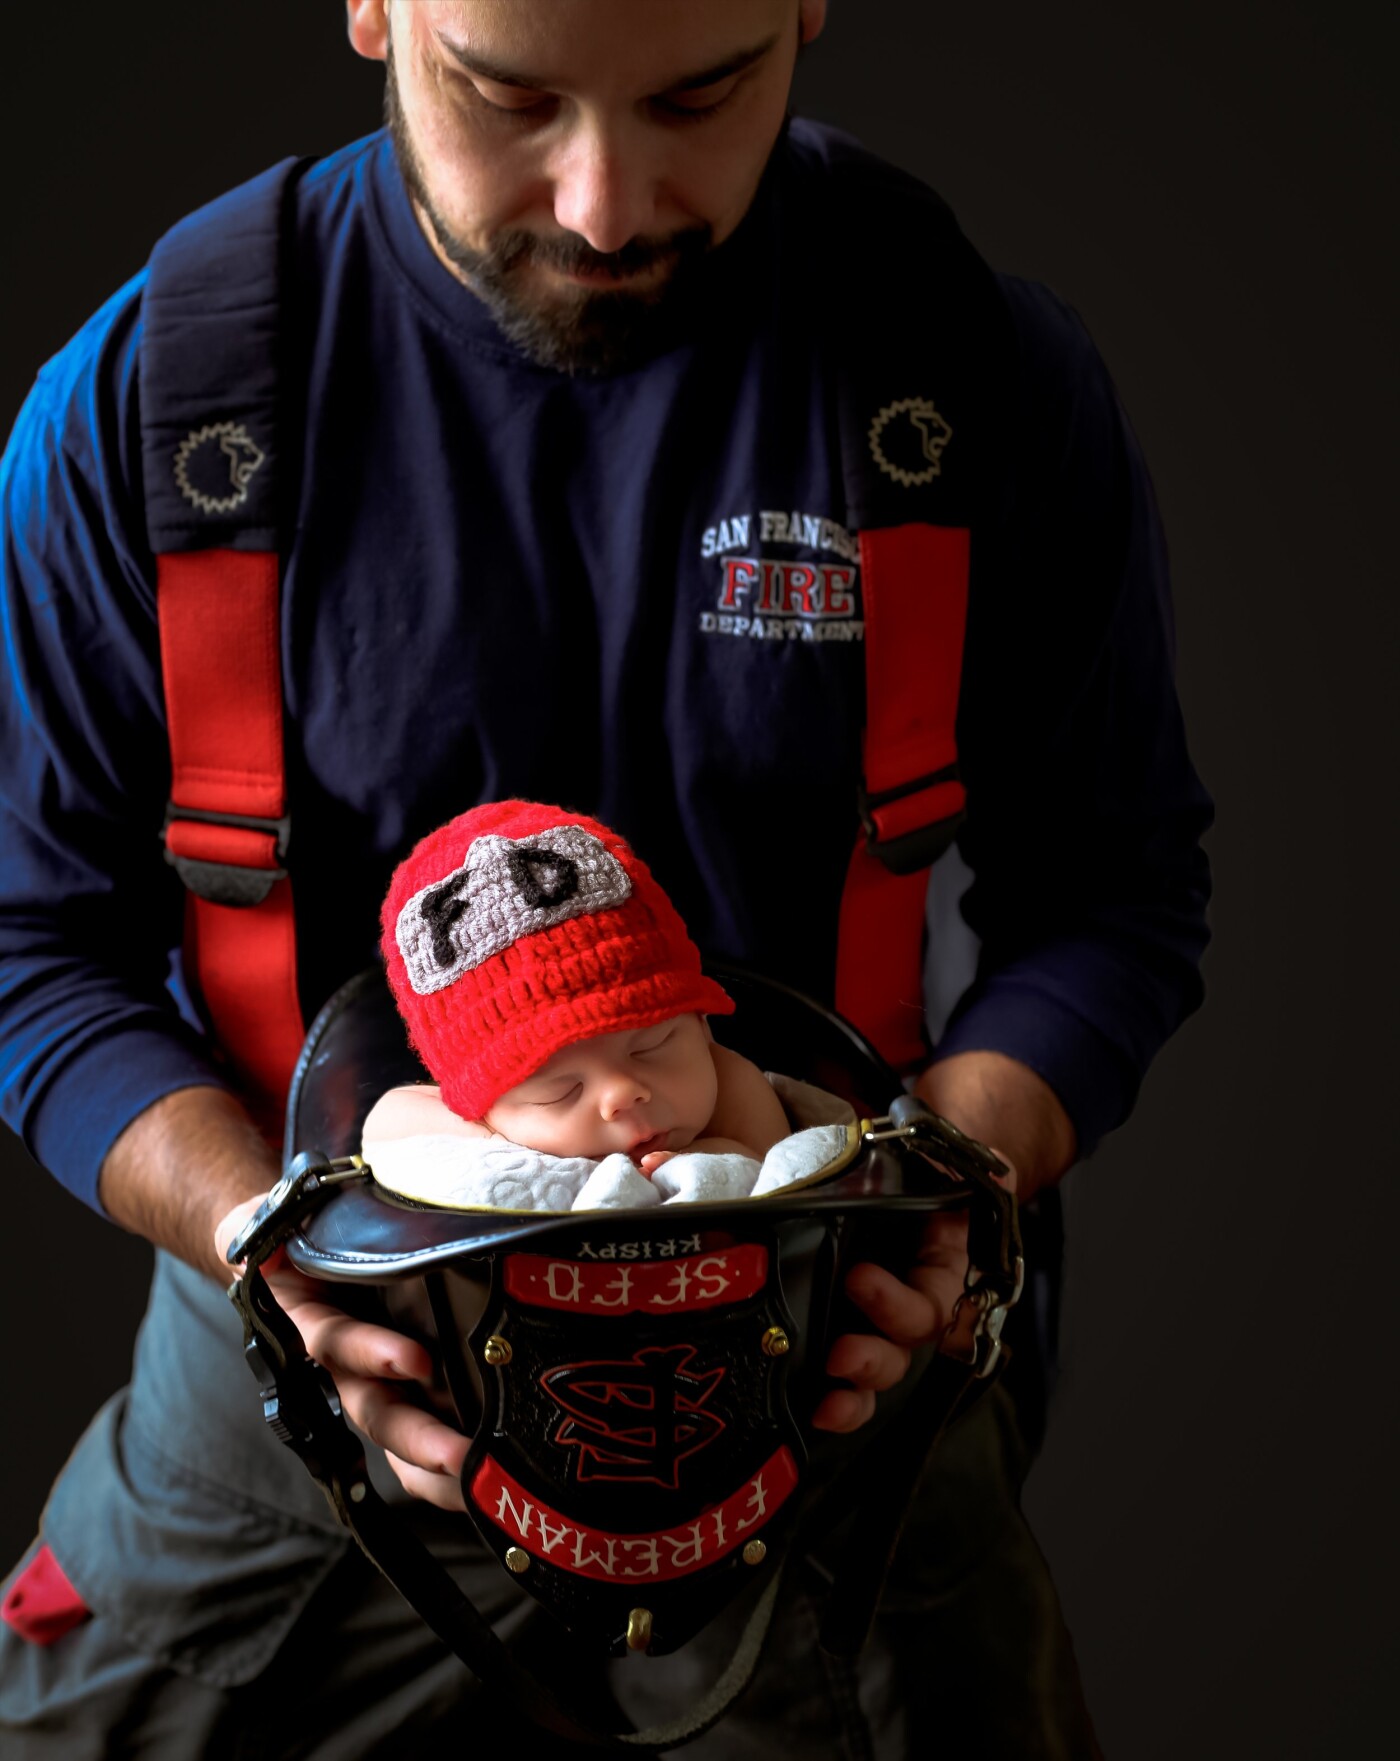 This is Mac and his Daddy who is a San Francisco firefighter. This was such a fun shoot at their home! For the safety of baby this is a composite shot. <br />
